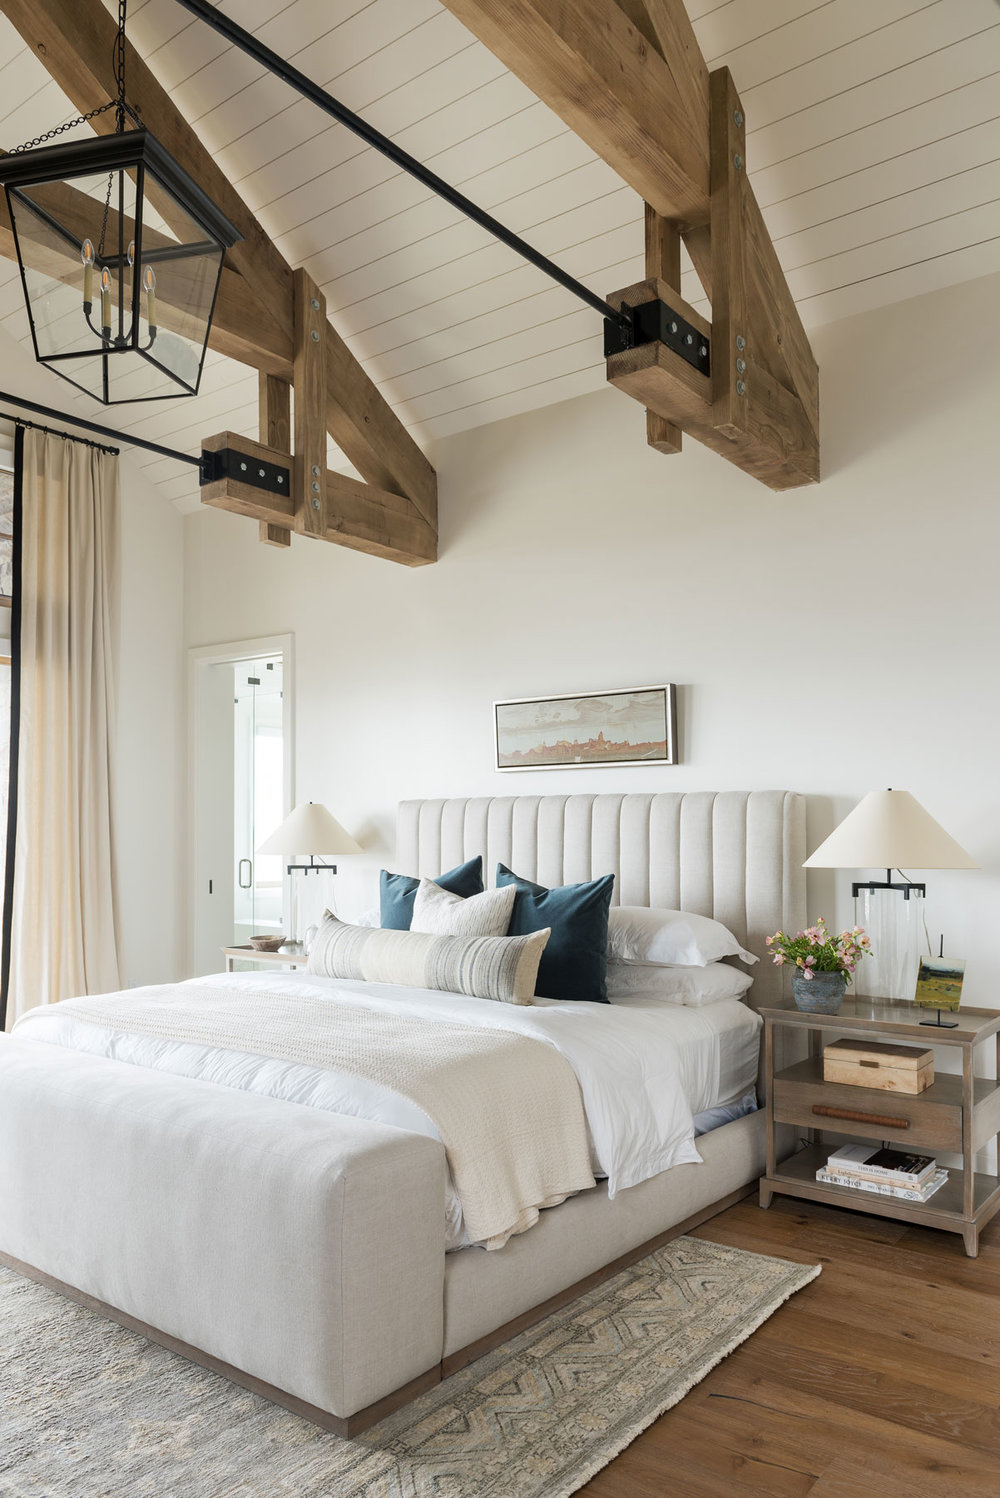 Bedroom with upholstered bed and wood beams on ceiling